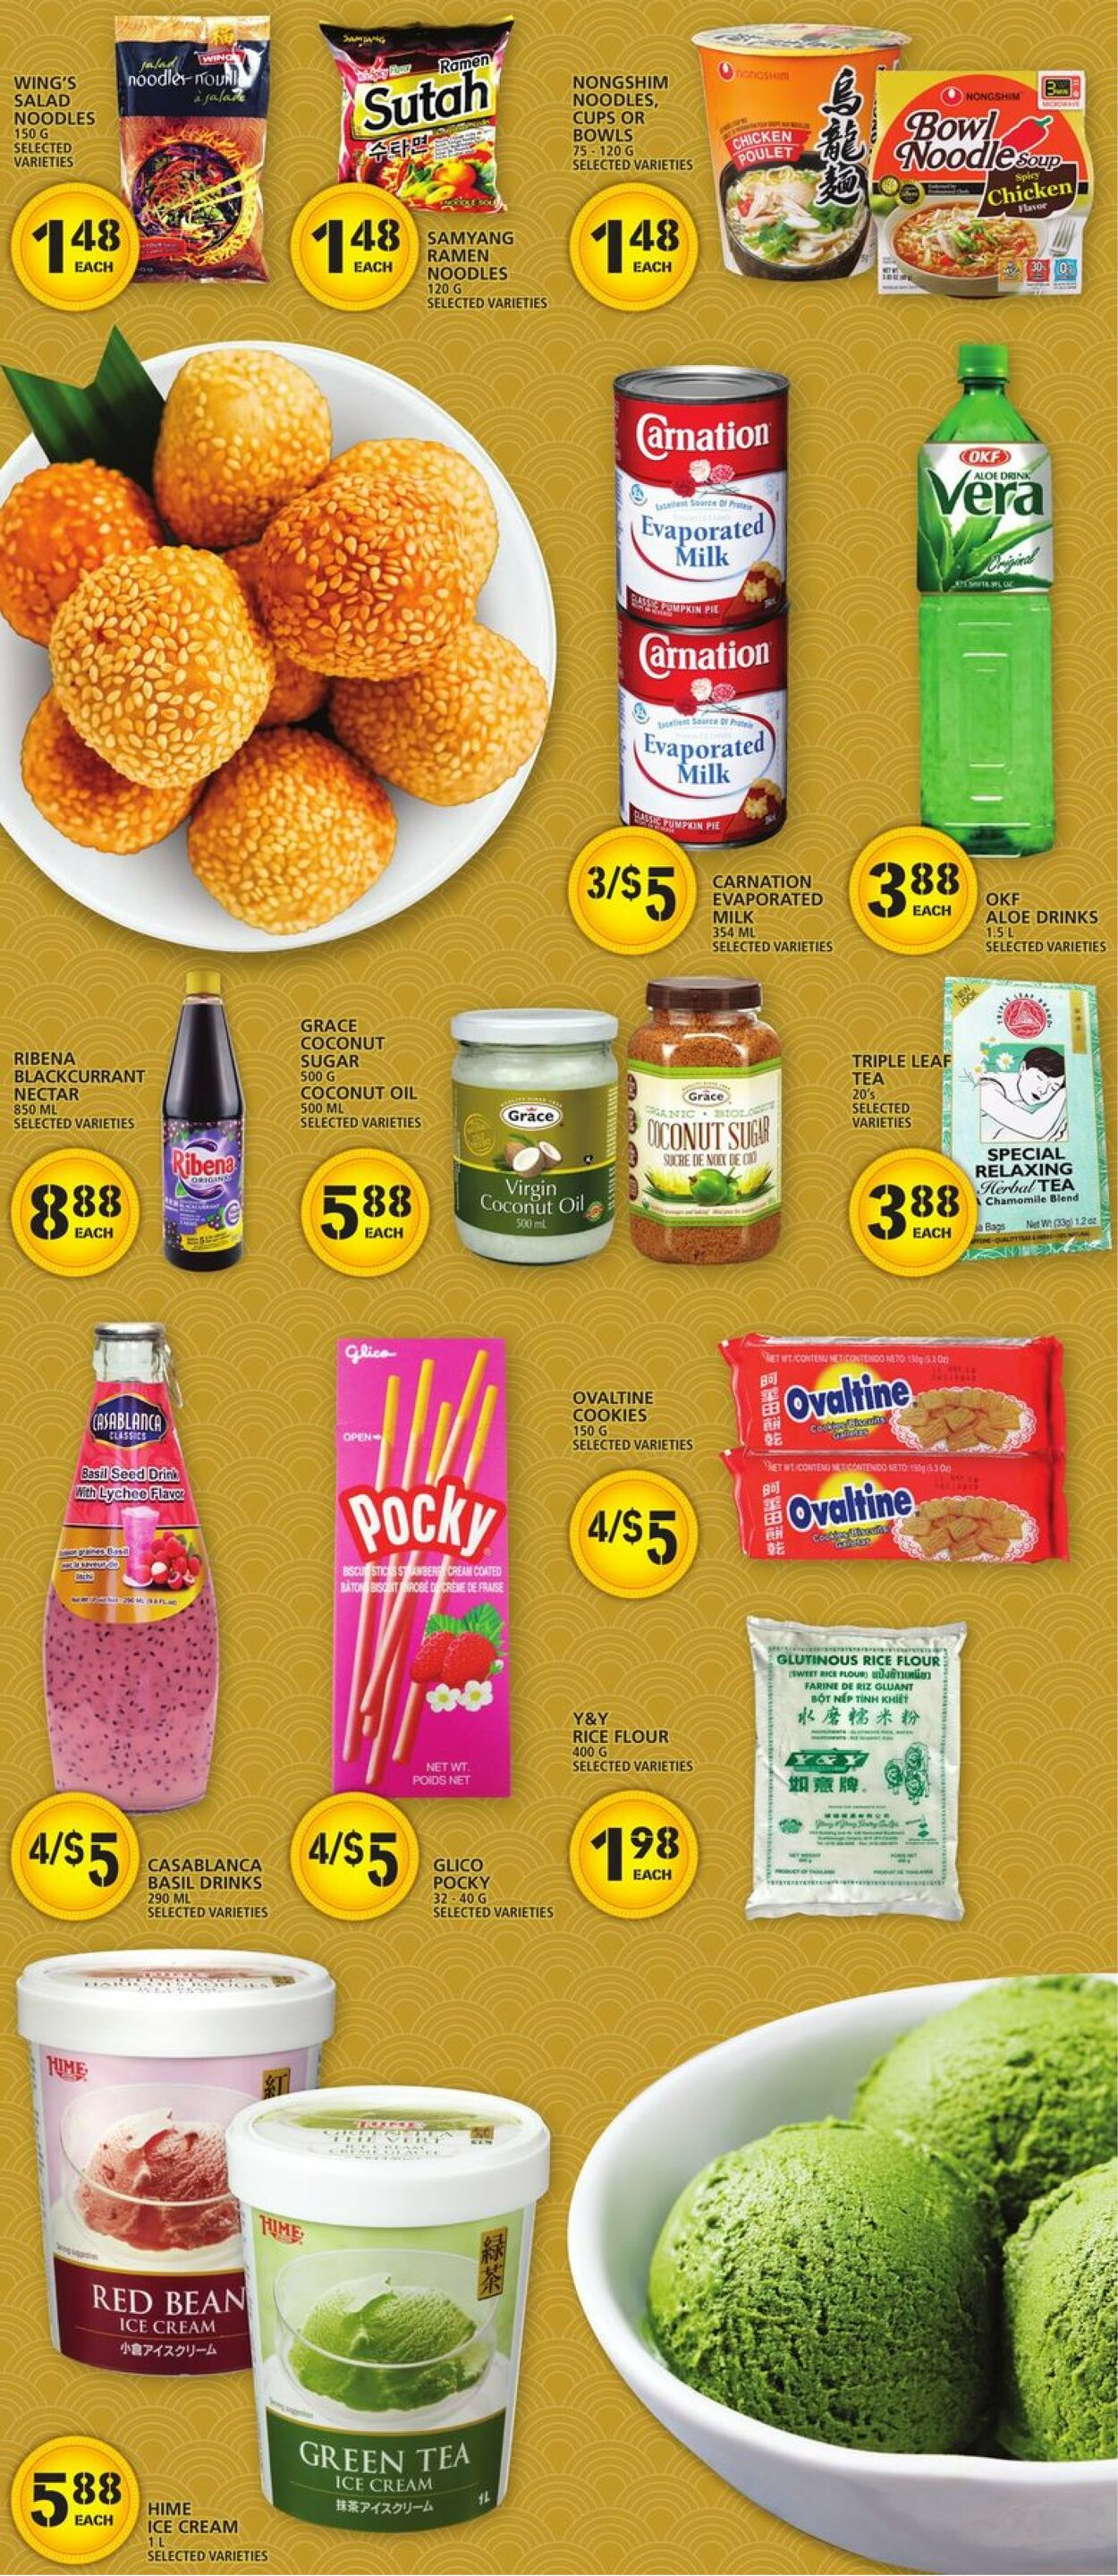 Food Basics Flyer from 01/19/2023